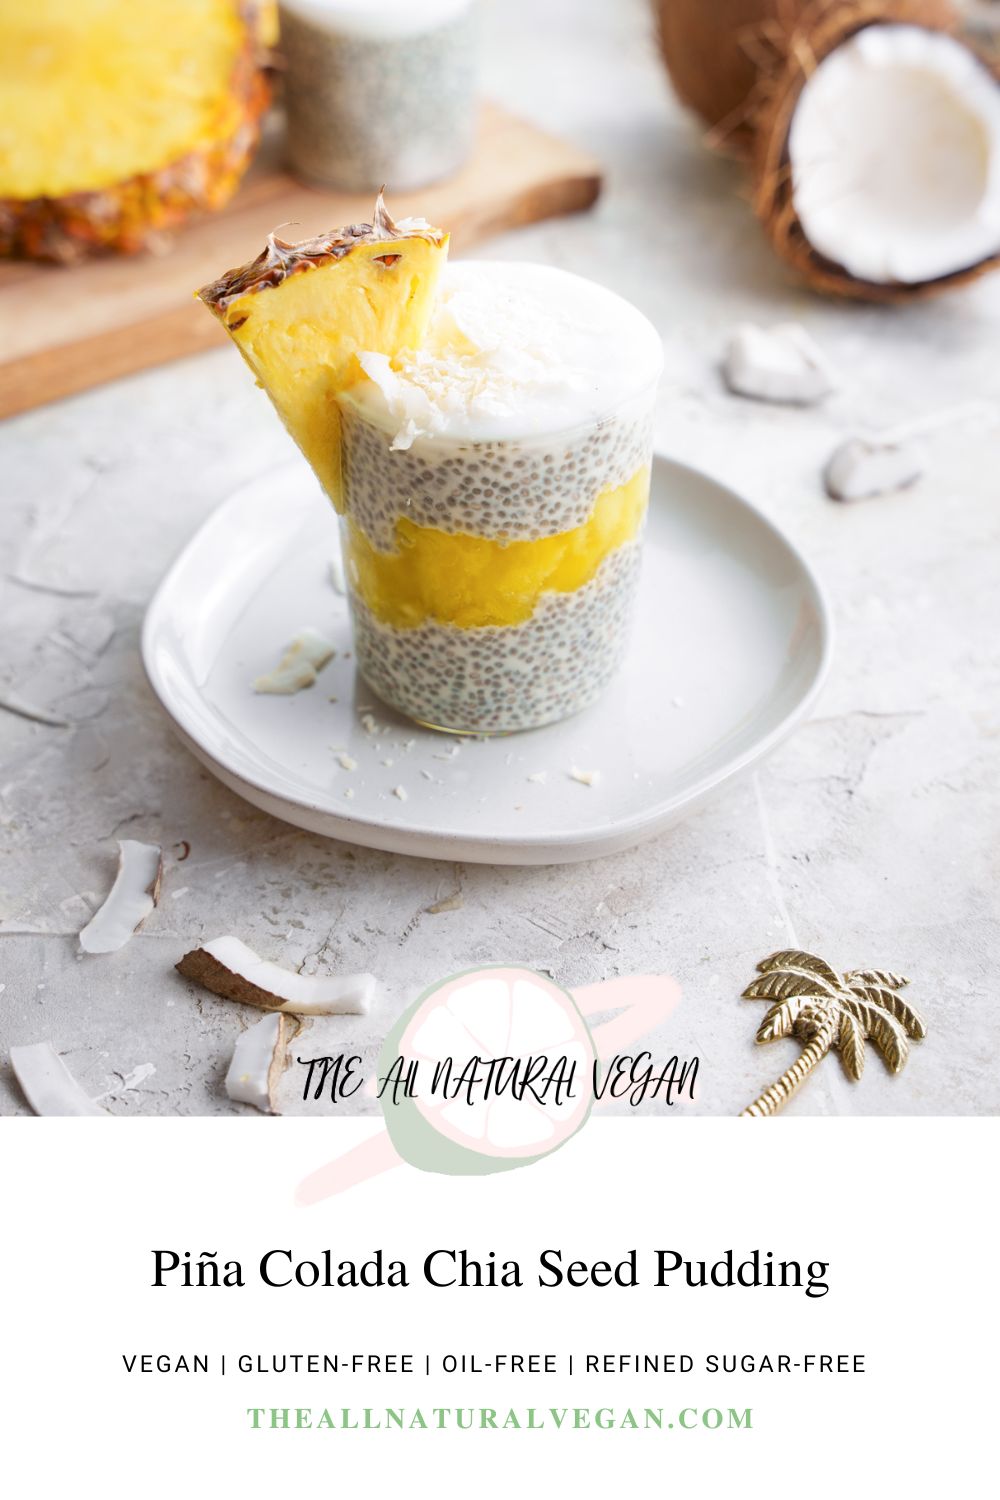 Pine colada chia seed pudding recipe card with coconut and pineapple layers stating this recipe is oil-free, gluten-free, refined sugar-free, and vegan